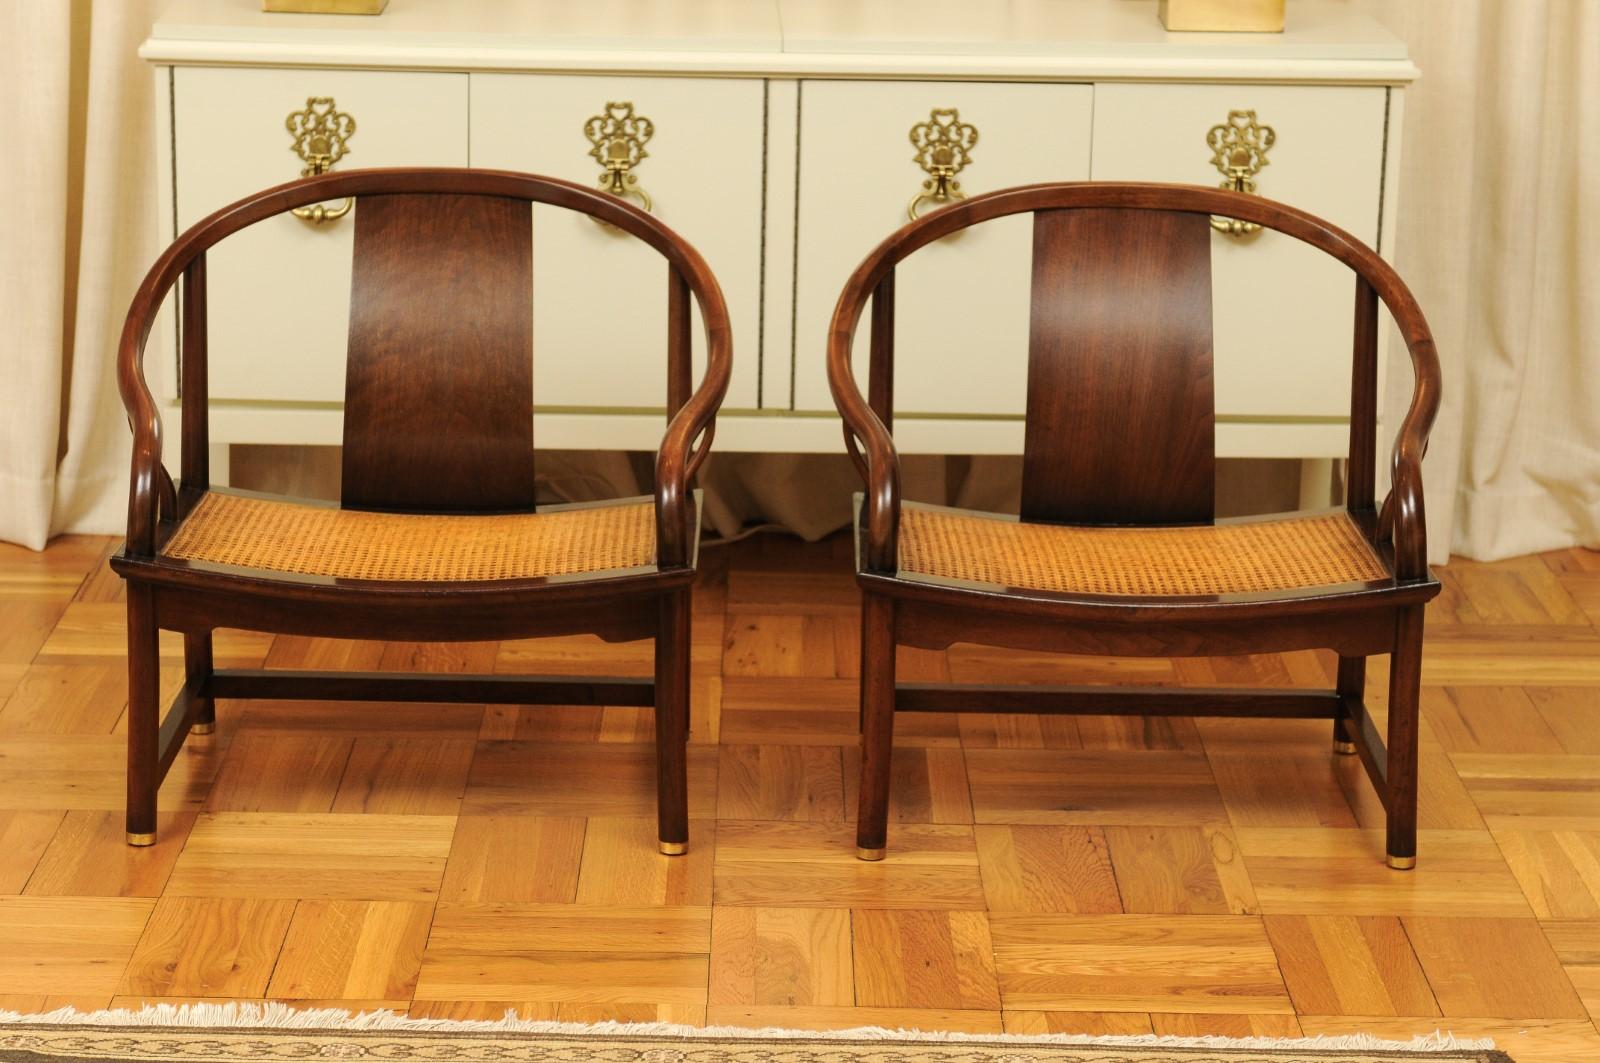 Mid-20th Century Stunning Restored Pair of Walnut Cane Loungers by Michael Taylor, circa 1960 For Sale